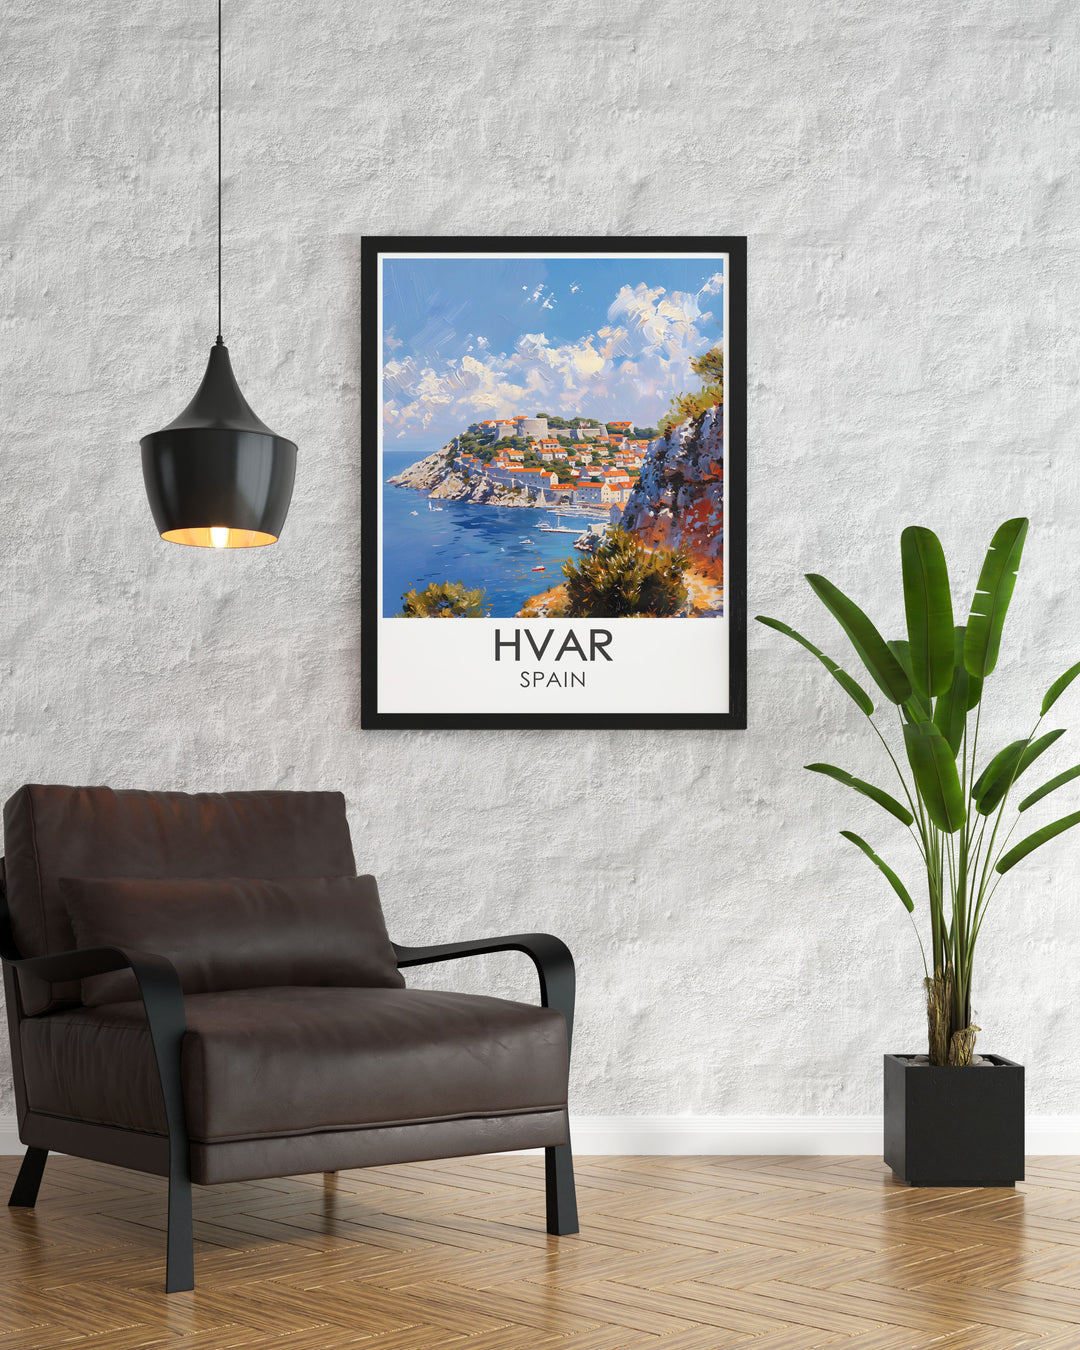 Travel poster depicting the grand Hvar Fortress, emphasizing its historical significance and stunning architecture. This print captures the essence of Croatias rich history and scenic views, making it a perfect gift for history buffs and travelers.